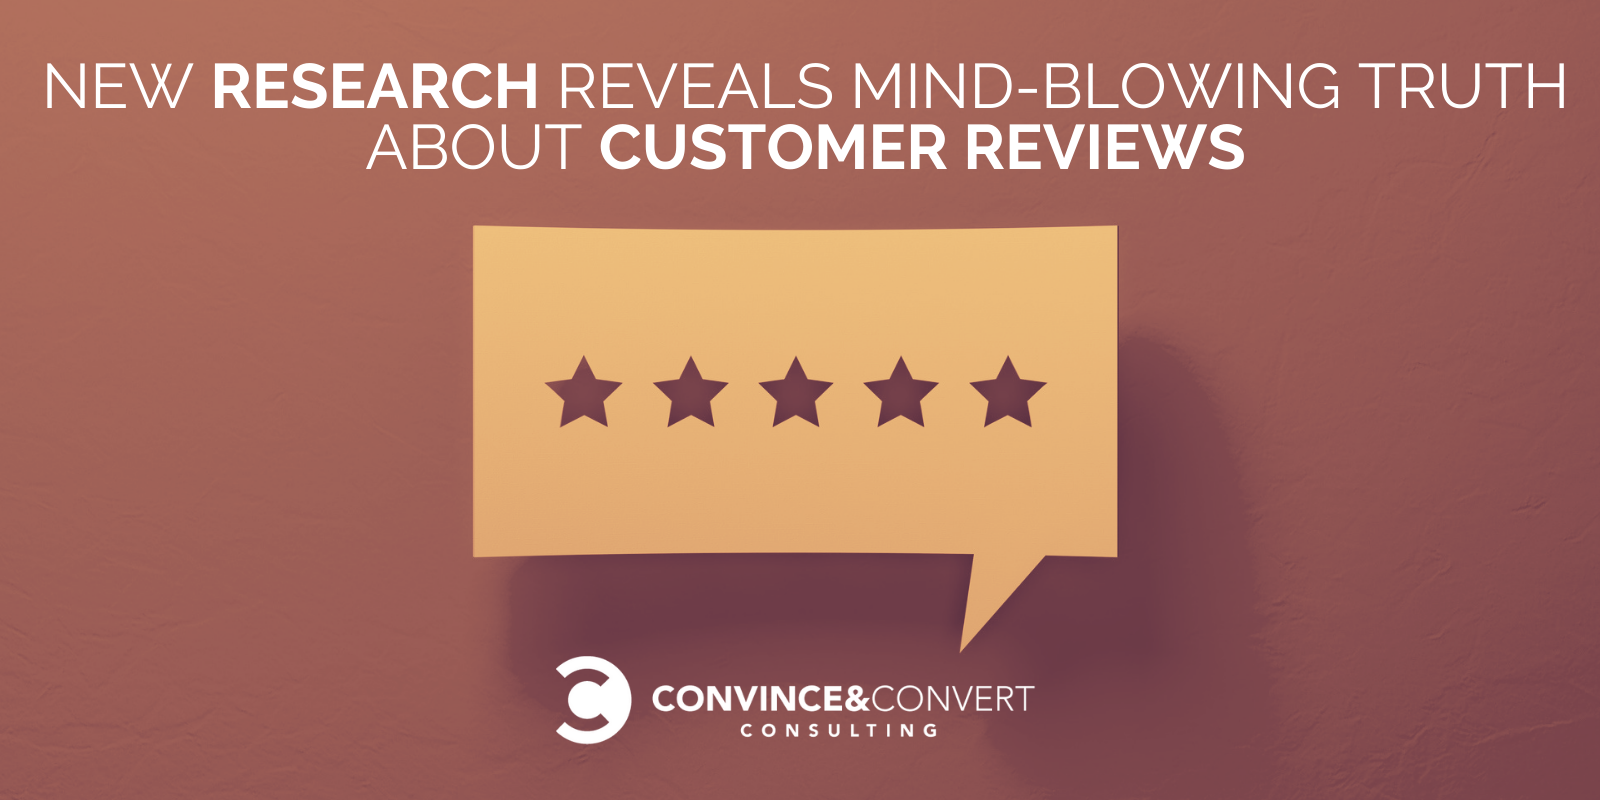 New Research Reveals Mind-Blowing Truth About Customer Reviews